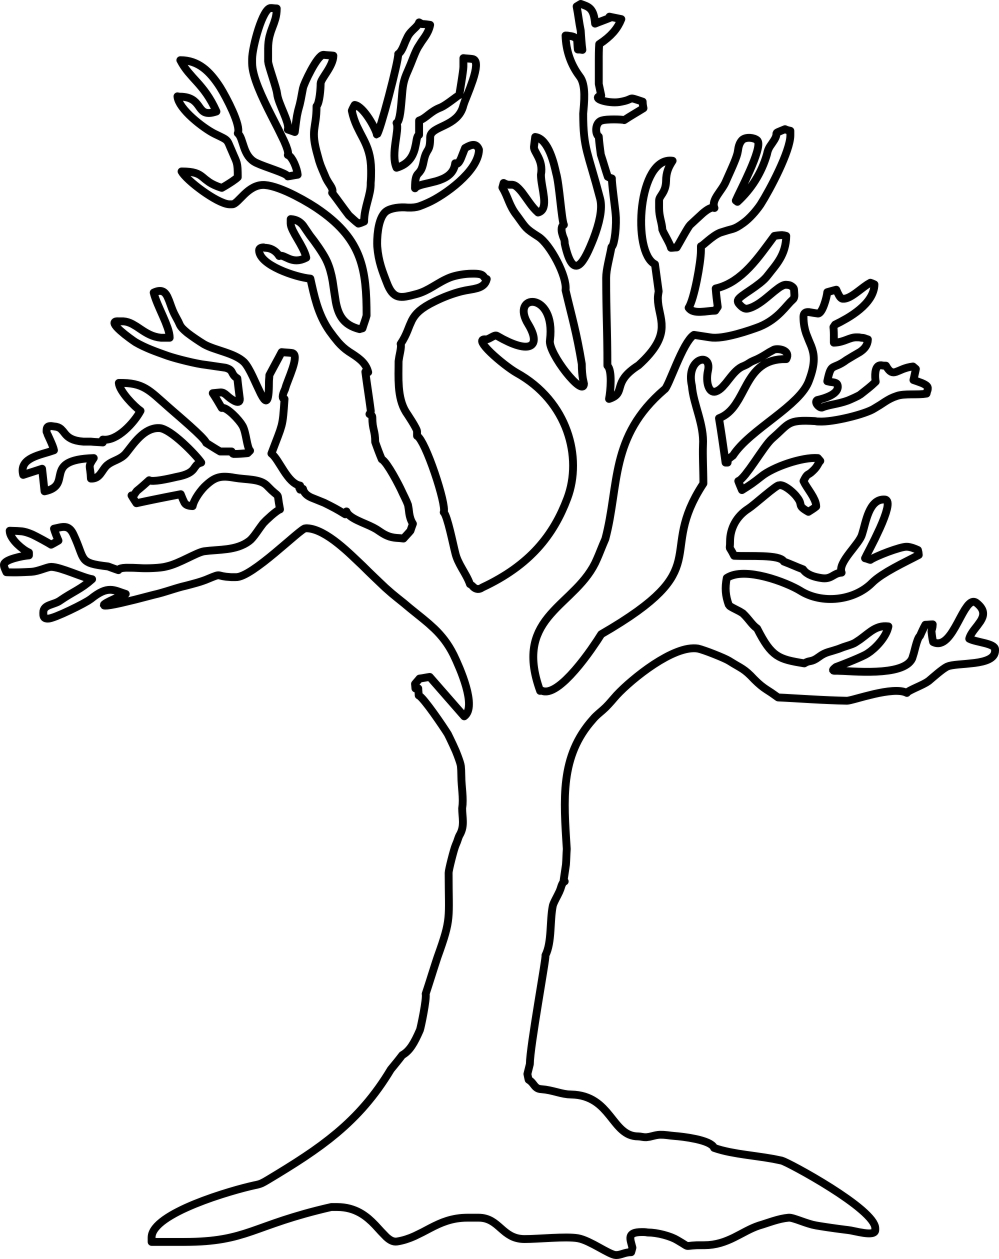 Leafless tree clipart - Clipground